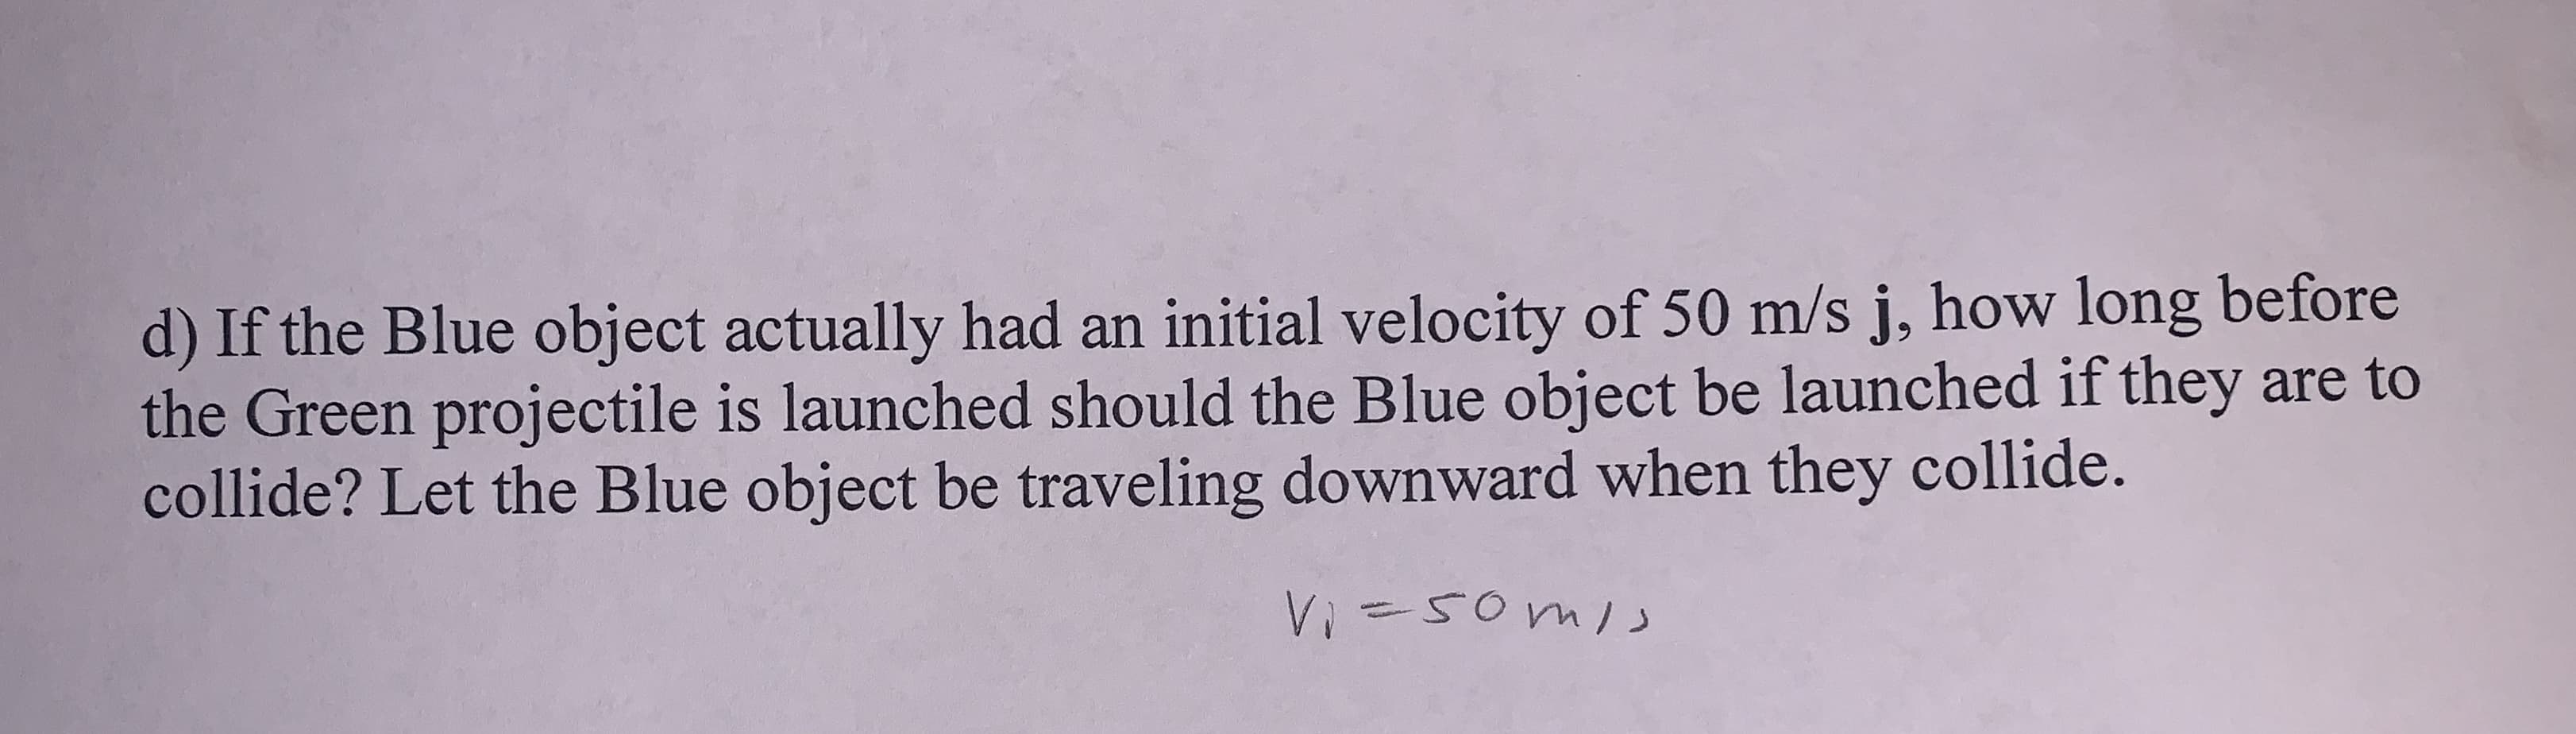 d) If the Blue object actually had an initial velocity of 50 m/s j, how long before
the Green projectile is launched should the Blue object be launched if they are to
collide? Let the Blue object be traveling downward when they collide.
Vi=50ml
